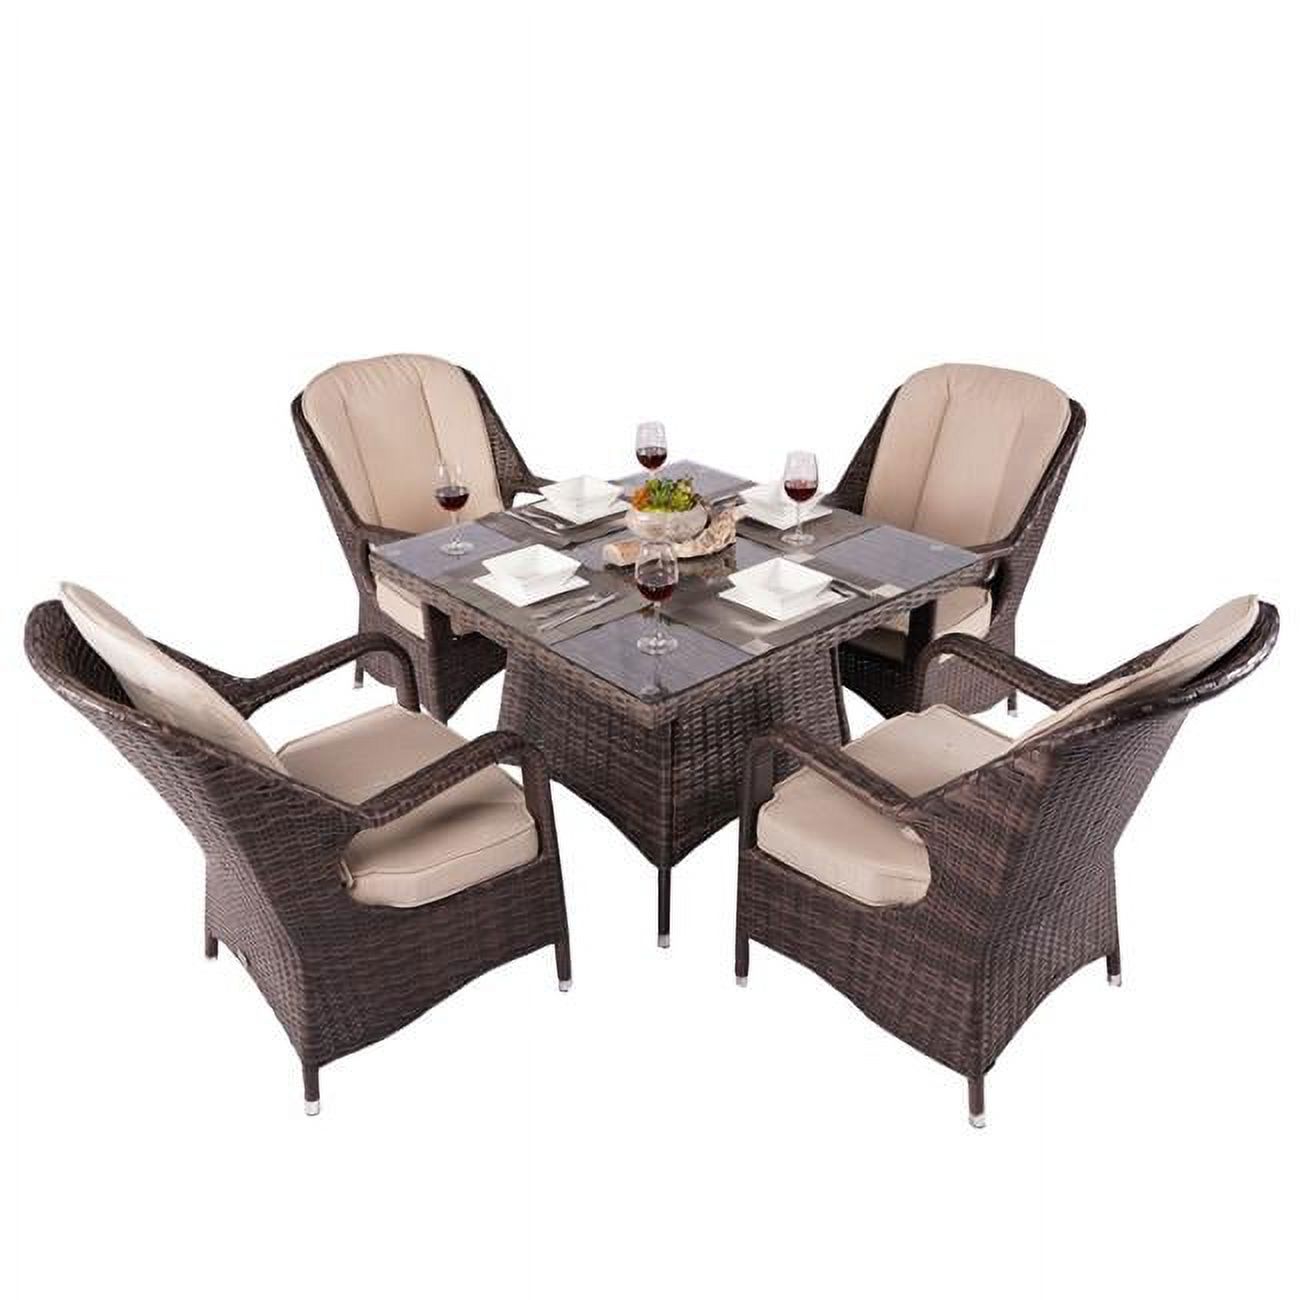 Direct Wicker  5 Piece 4 Seat Outdoor Garden Lamao Rattan Square Dining Table and Chairs Set - image 1 of 1